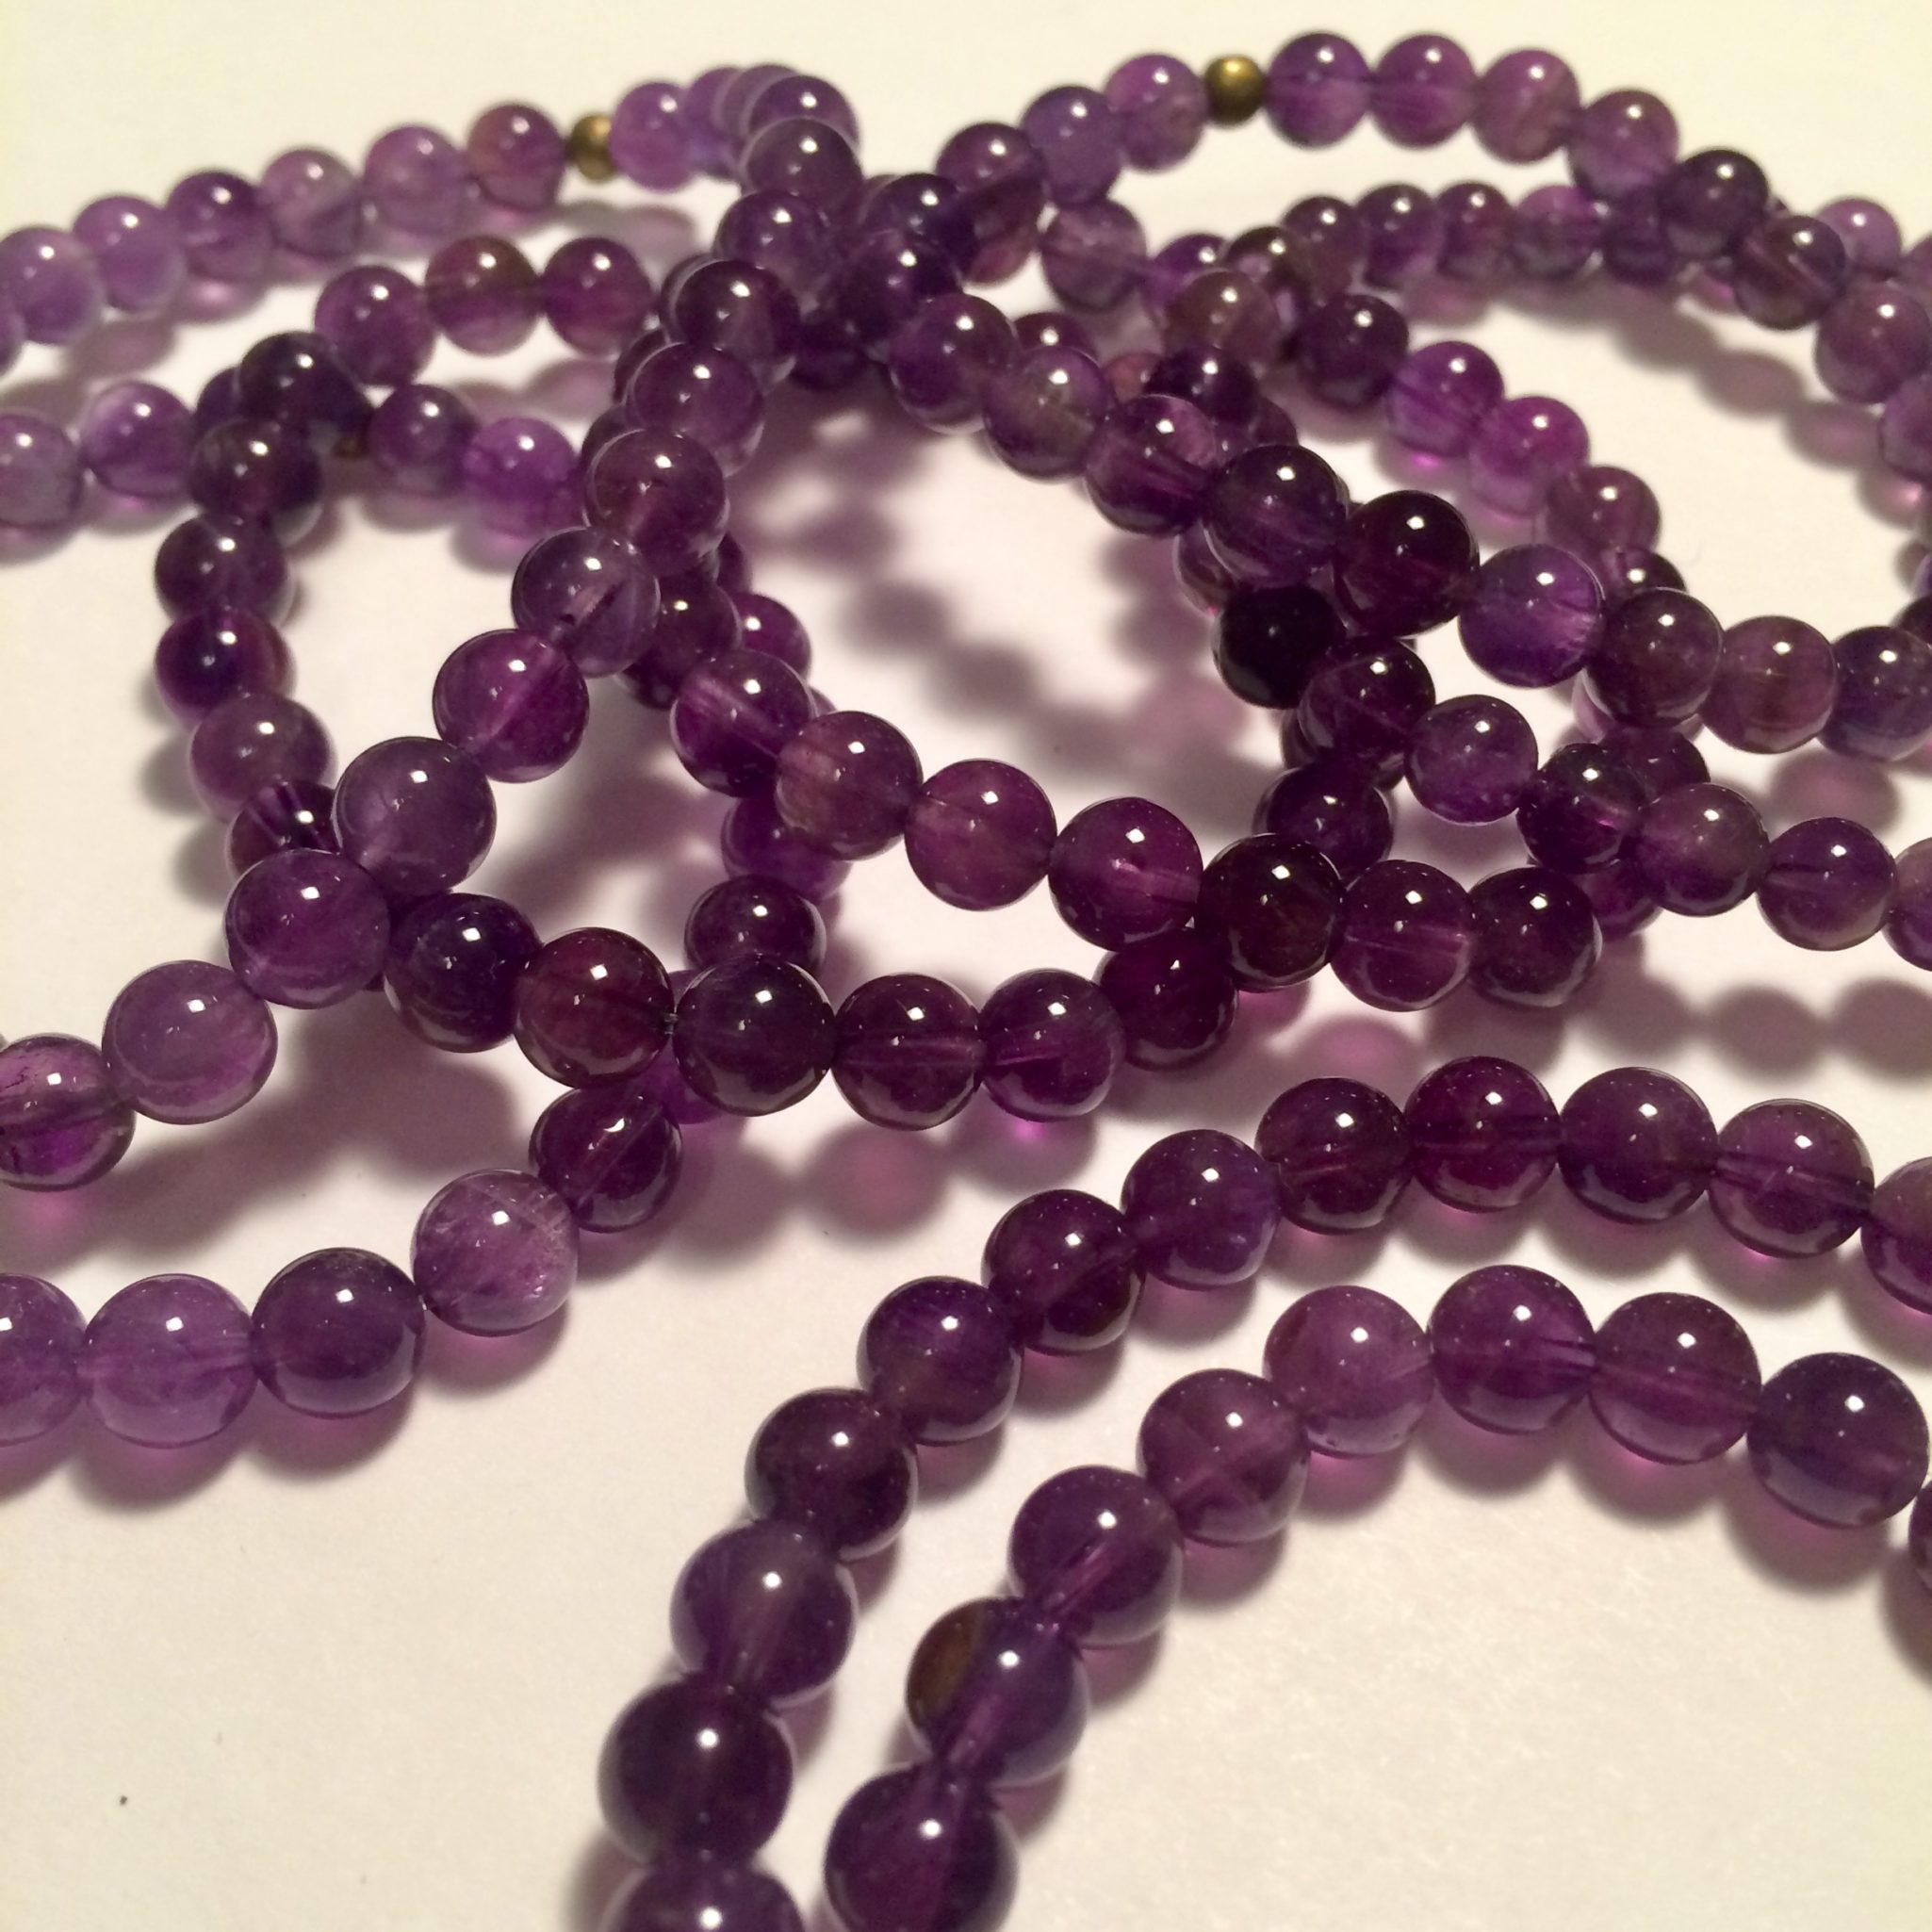 Amethyst Bracelet (AAA quality) - Alignment with Higher Self